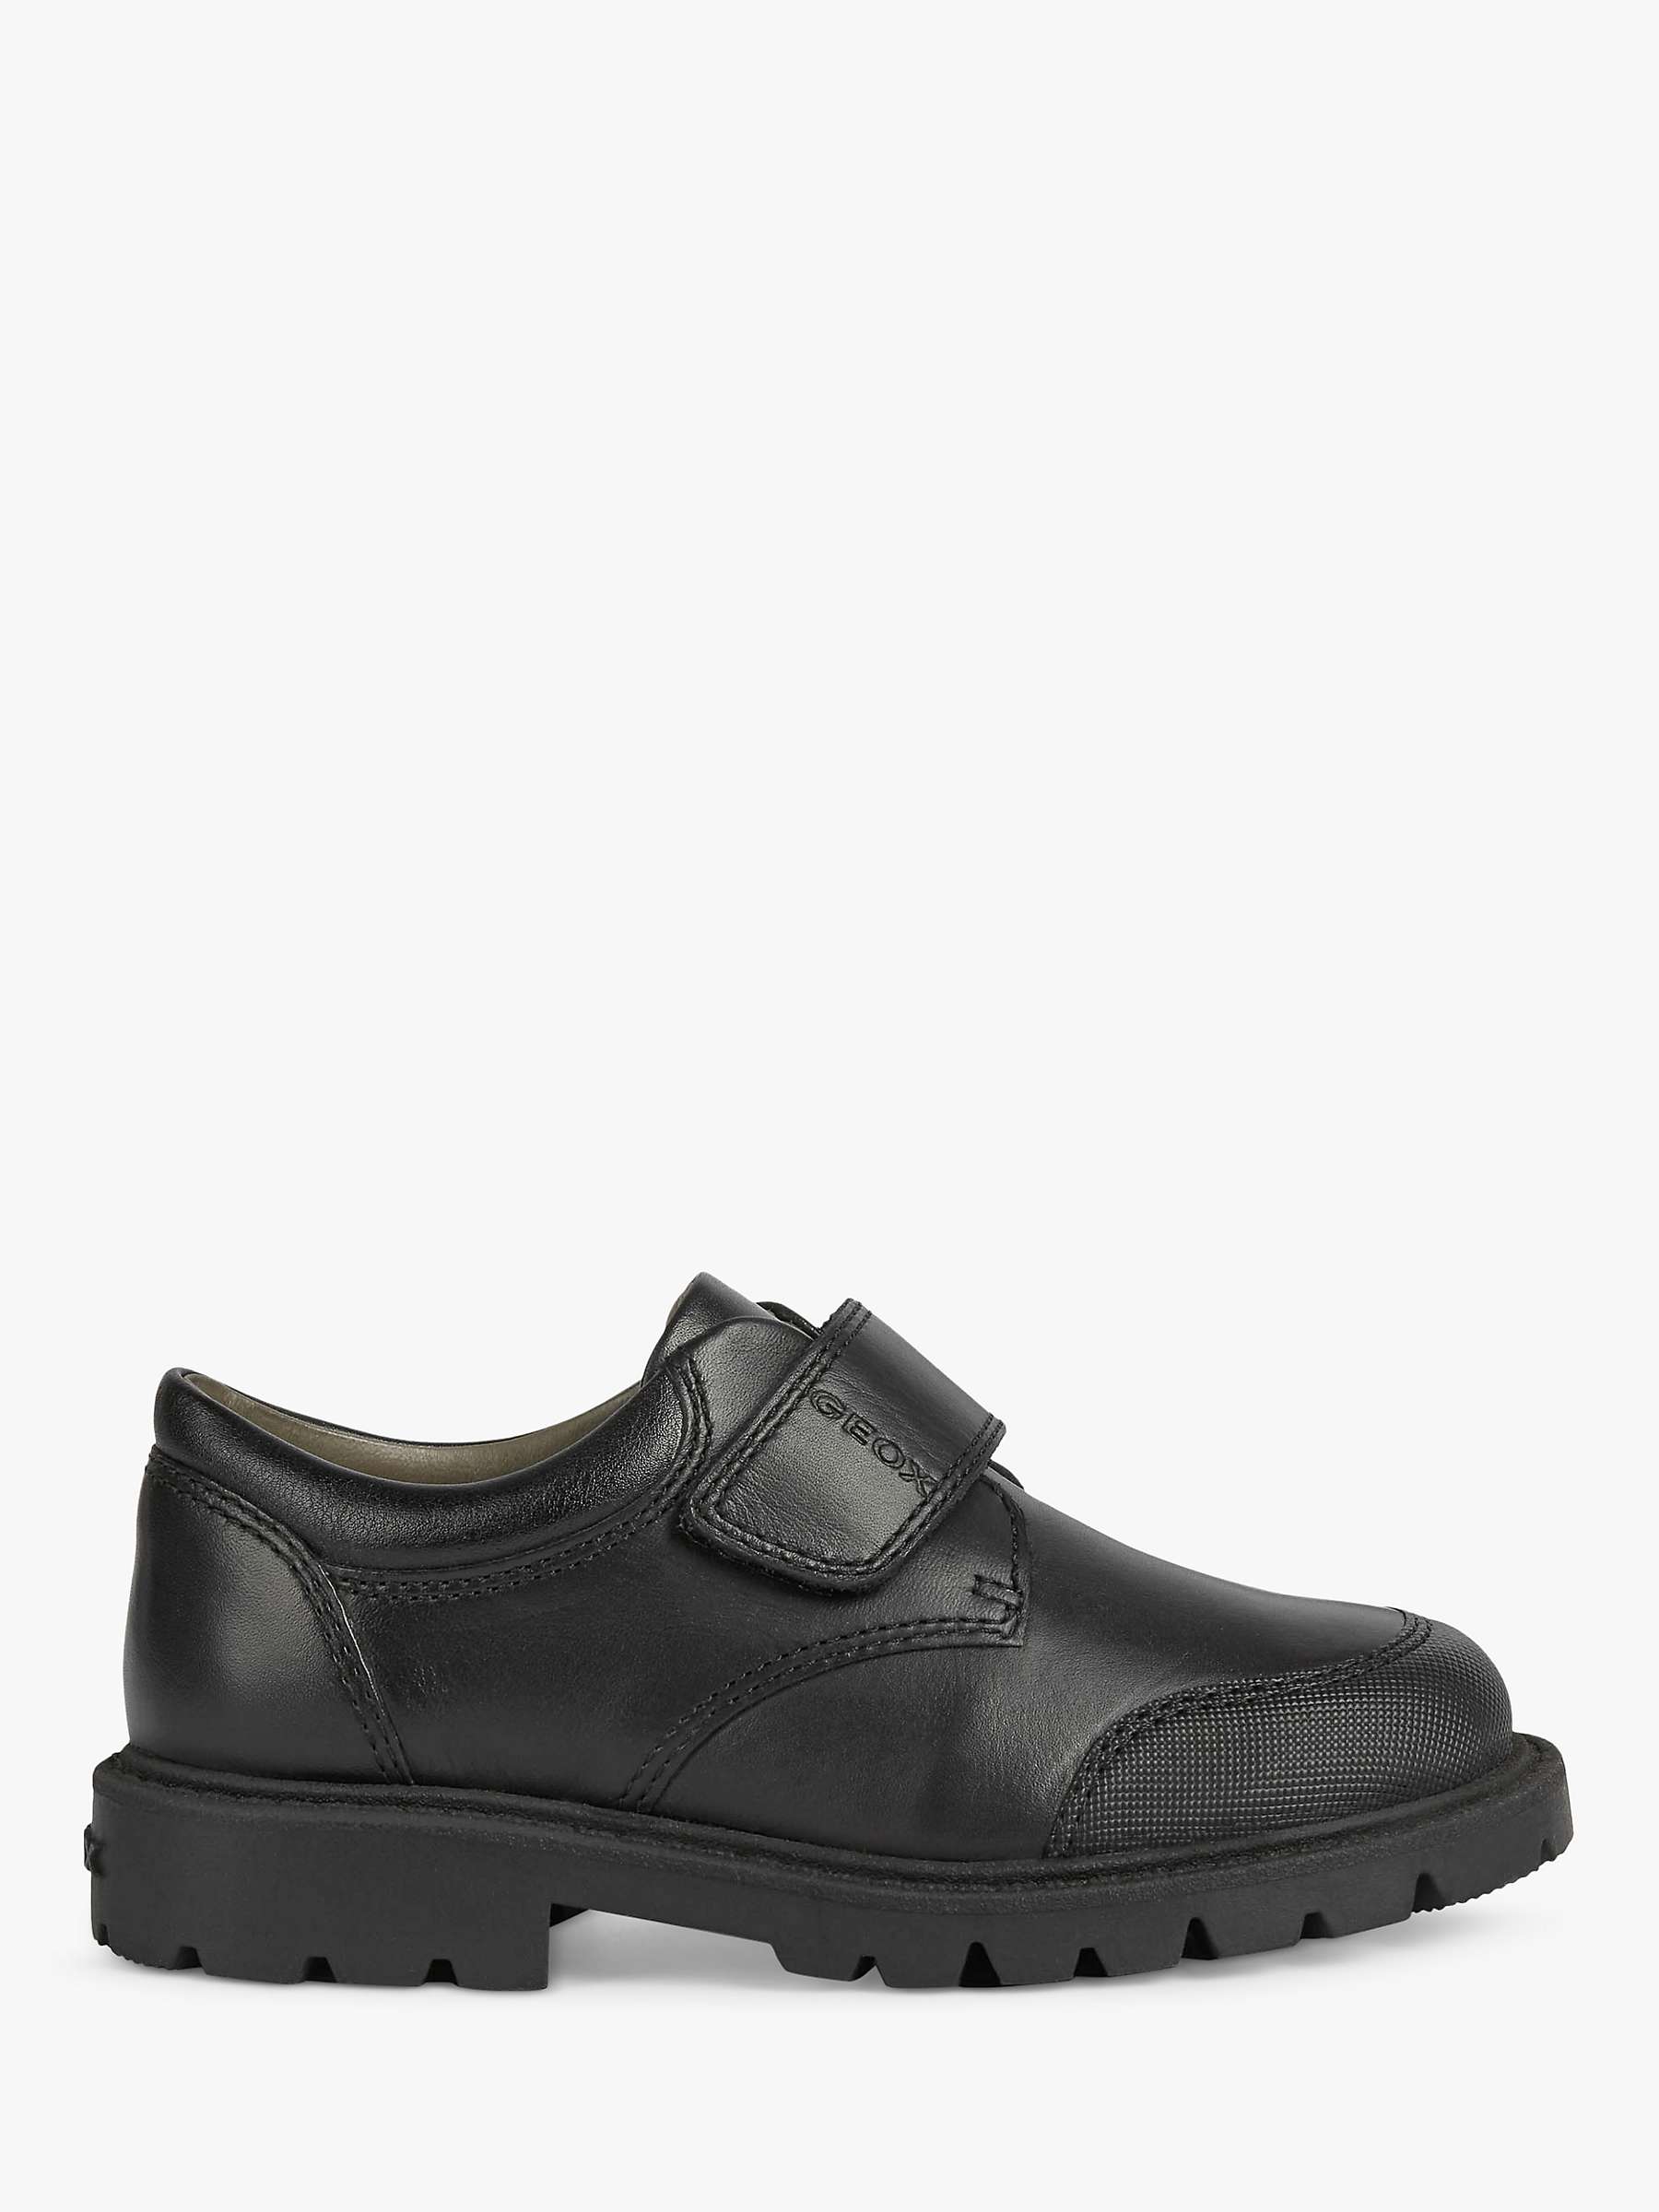 Buy Geox Kids' Shaylax Leather School Shoes, Black Online at johnlewis.com